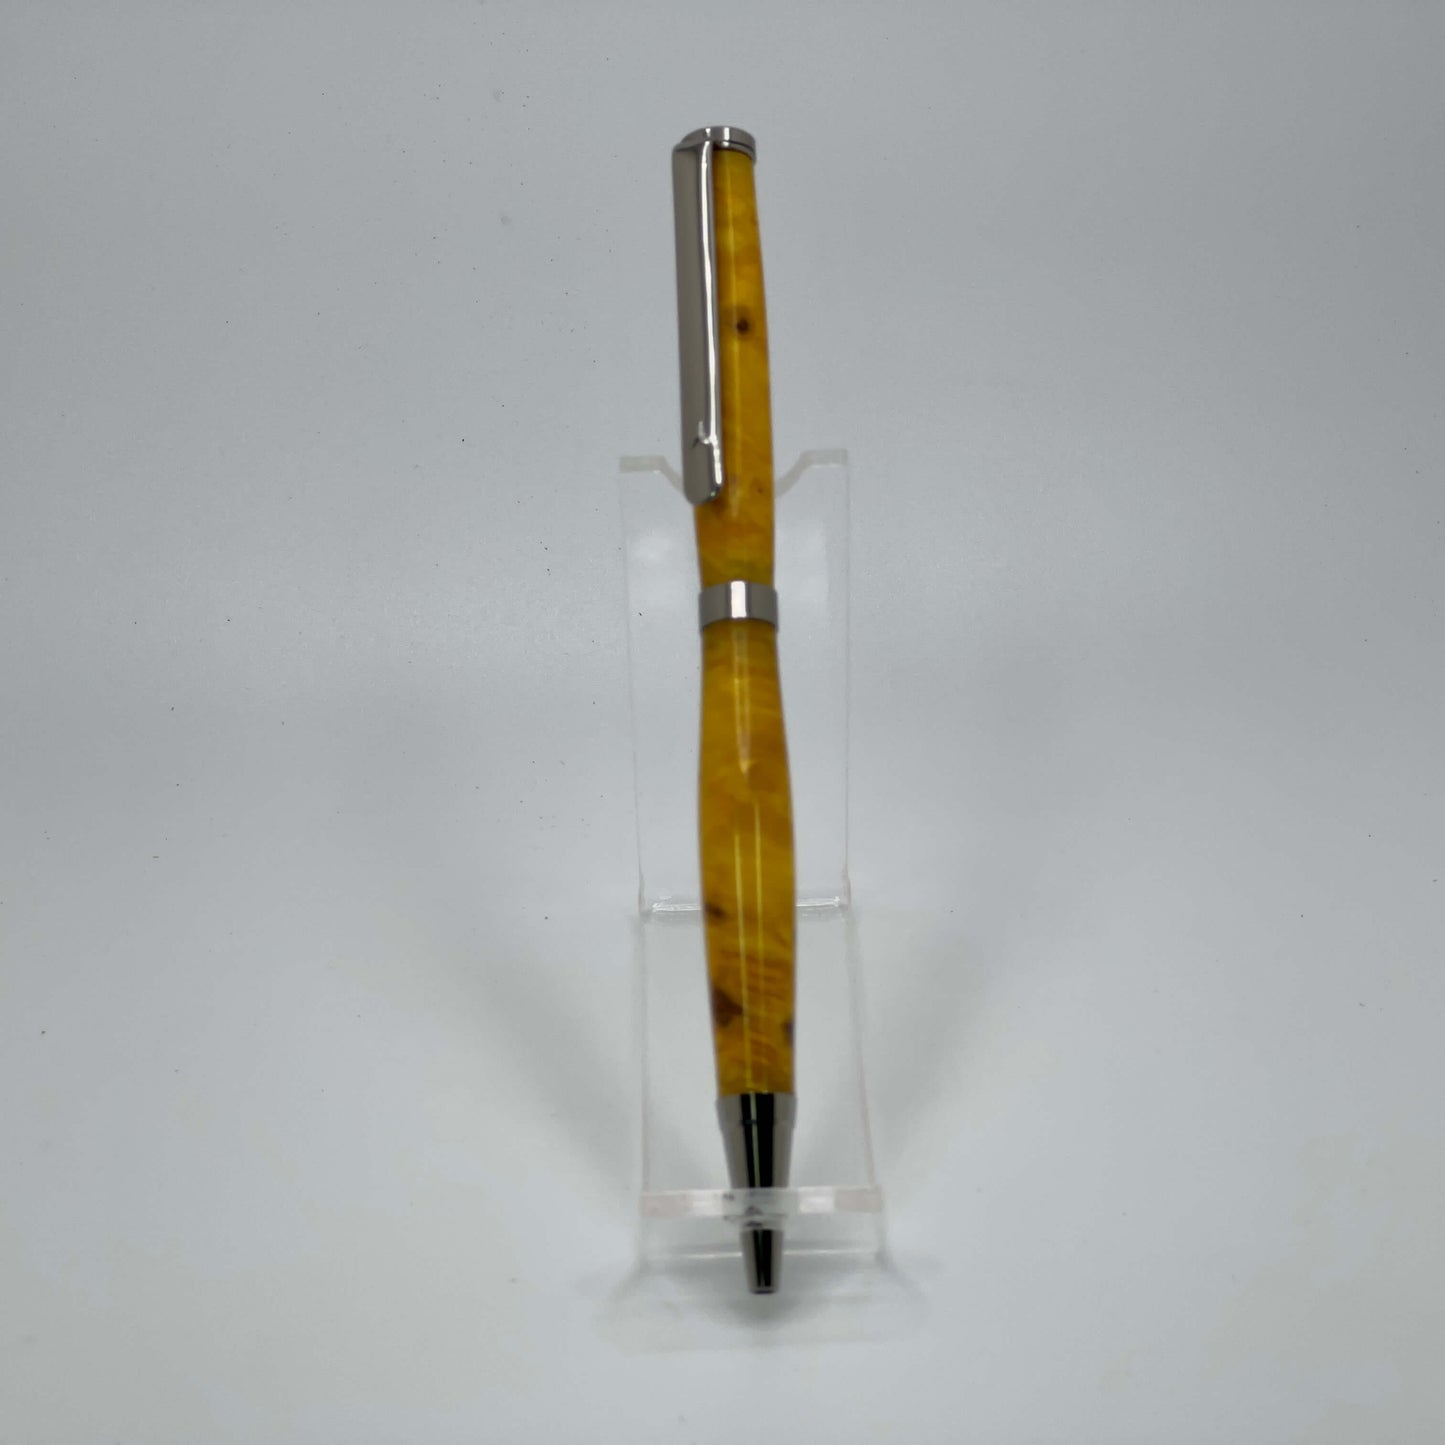 Front view of handcrafted pen with Box Elder Burl wood dyed yellow